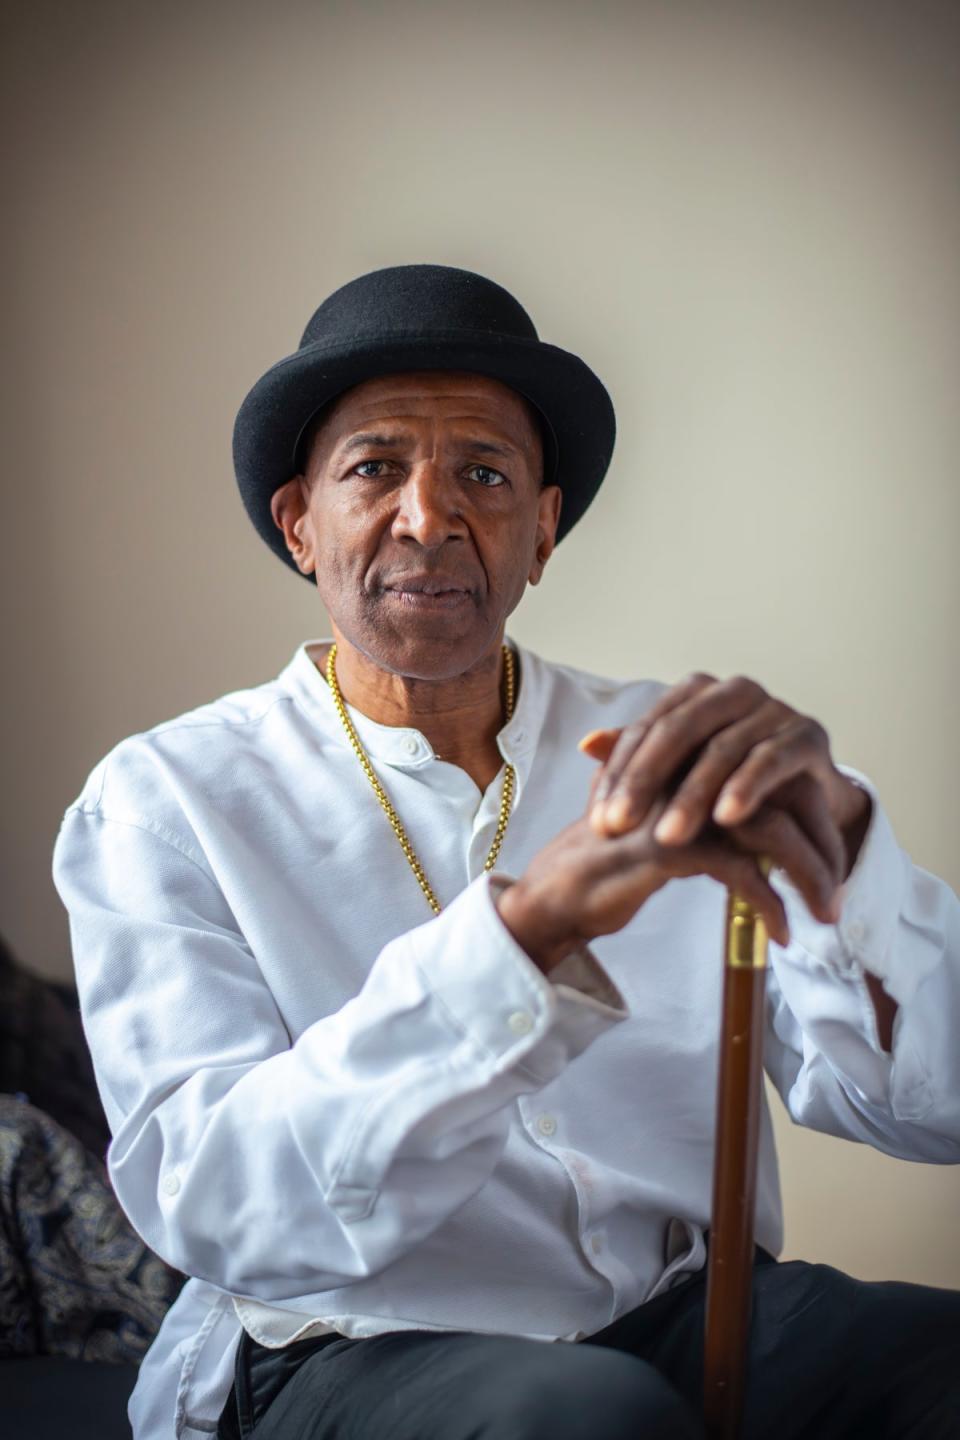 Conroy Downie is among the Windrush victims still waiting for compensation (Jamie Lau/Age UK/PA Wire)